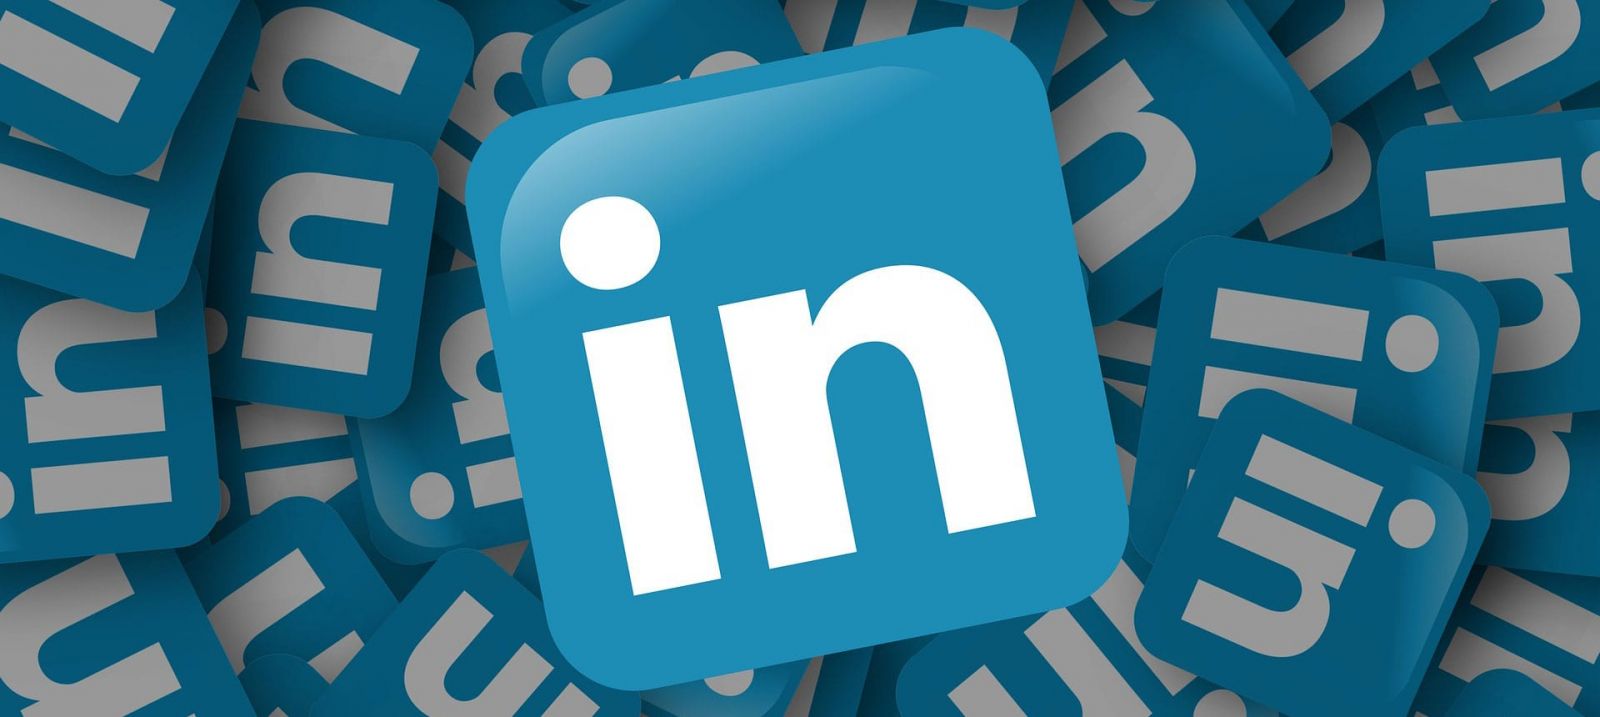 A Beginner’s Guide to LinkedIn, the Biggest Social Network for Business